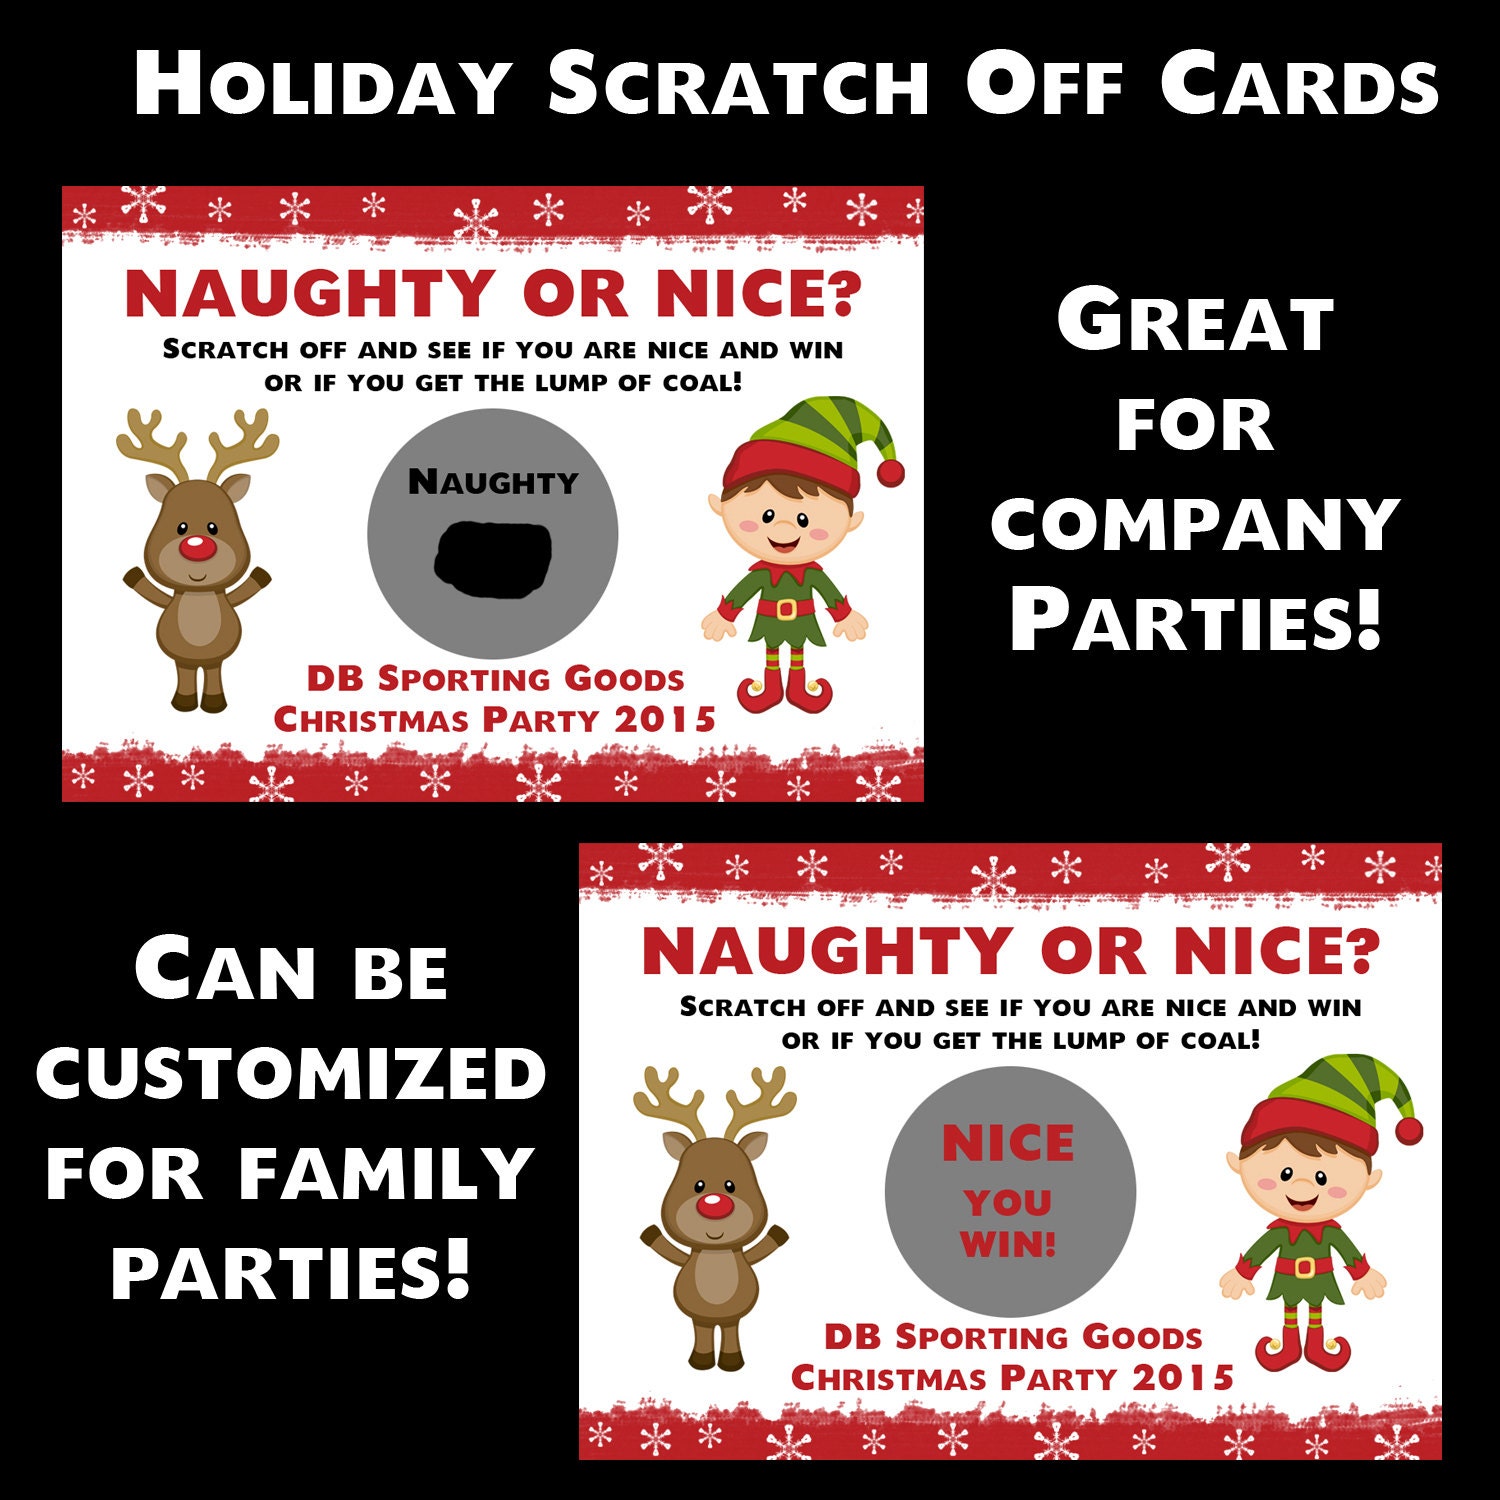 holiday lock promotion code scratch off